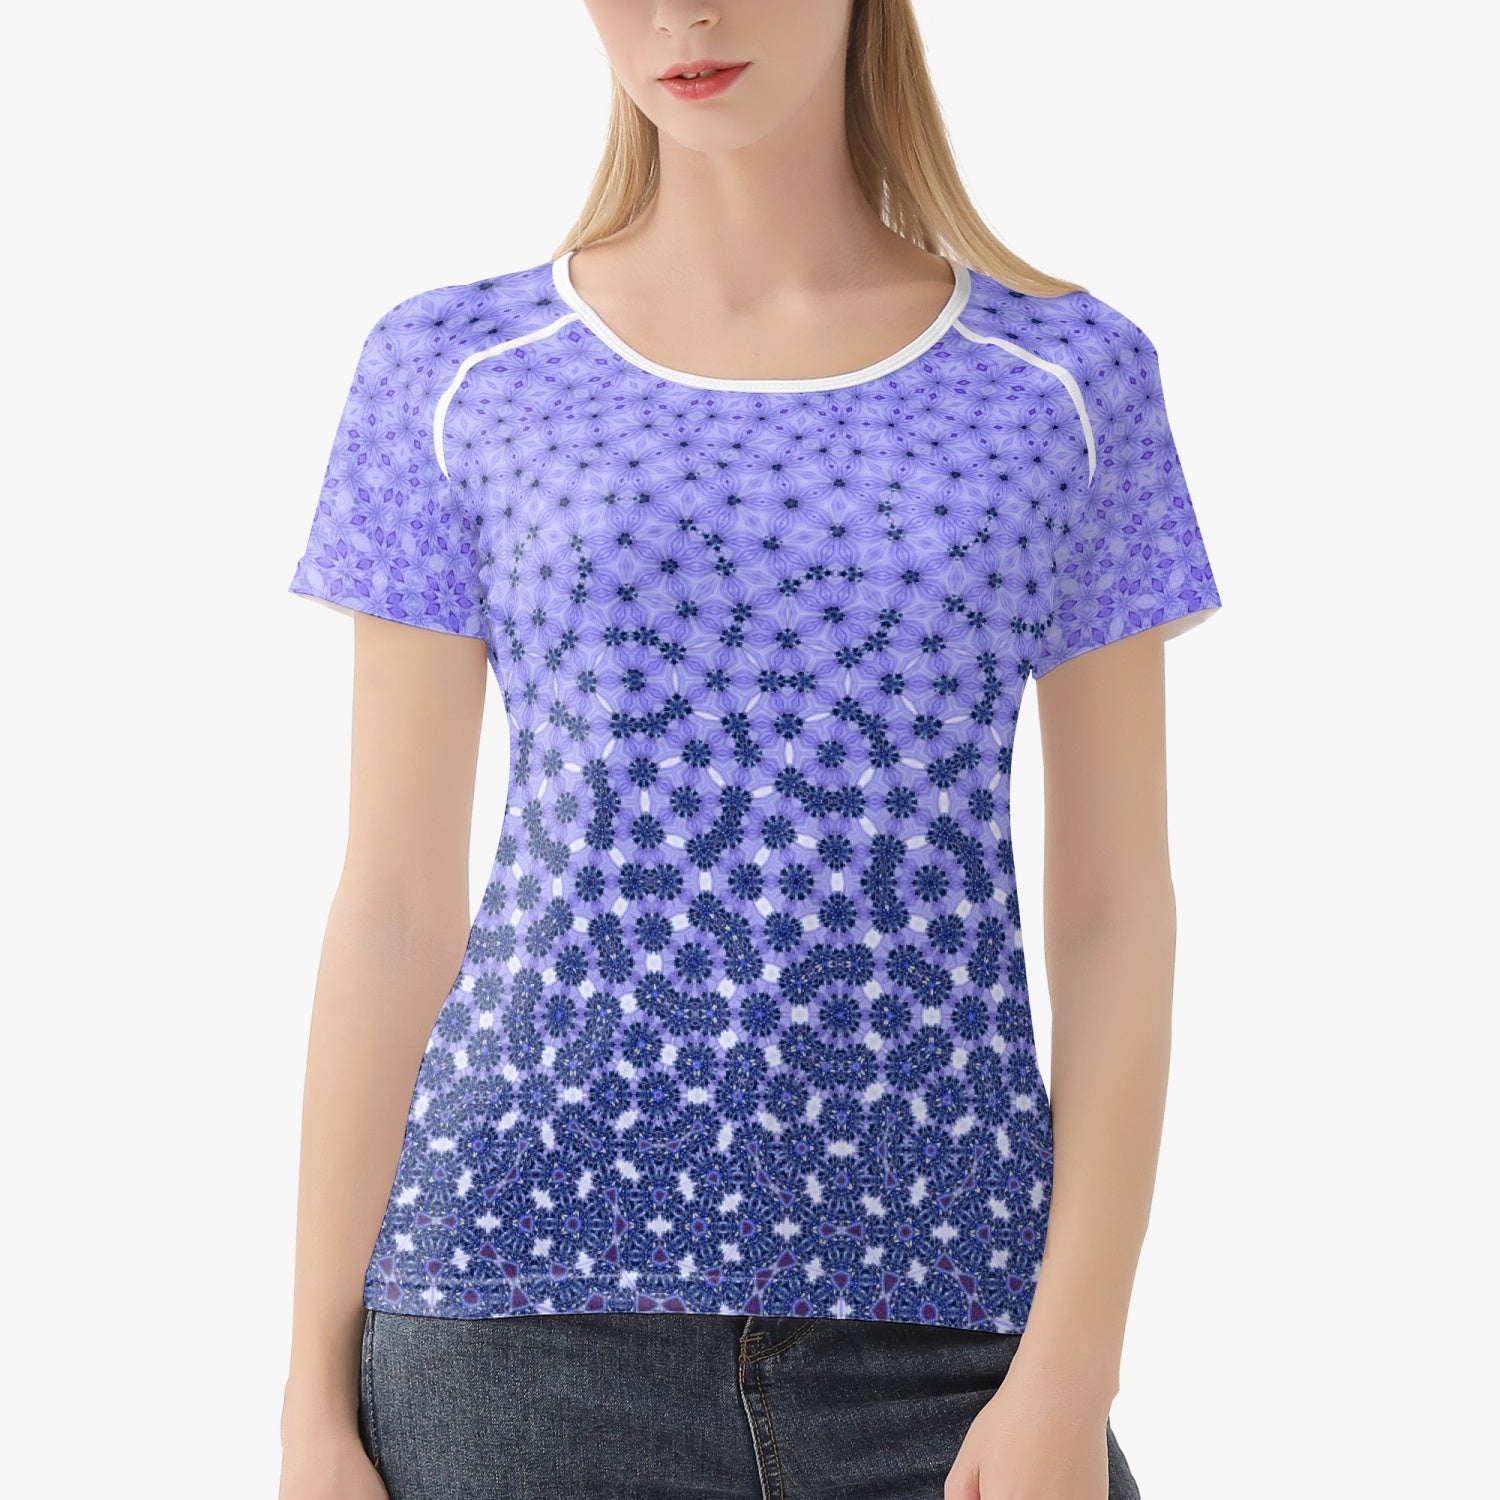 "Knowing" Lila Crown Chacra  Handmade Yoga Top for  Women T-shirt, by Sensus Studio Design